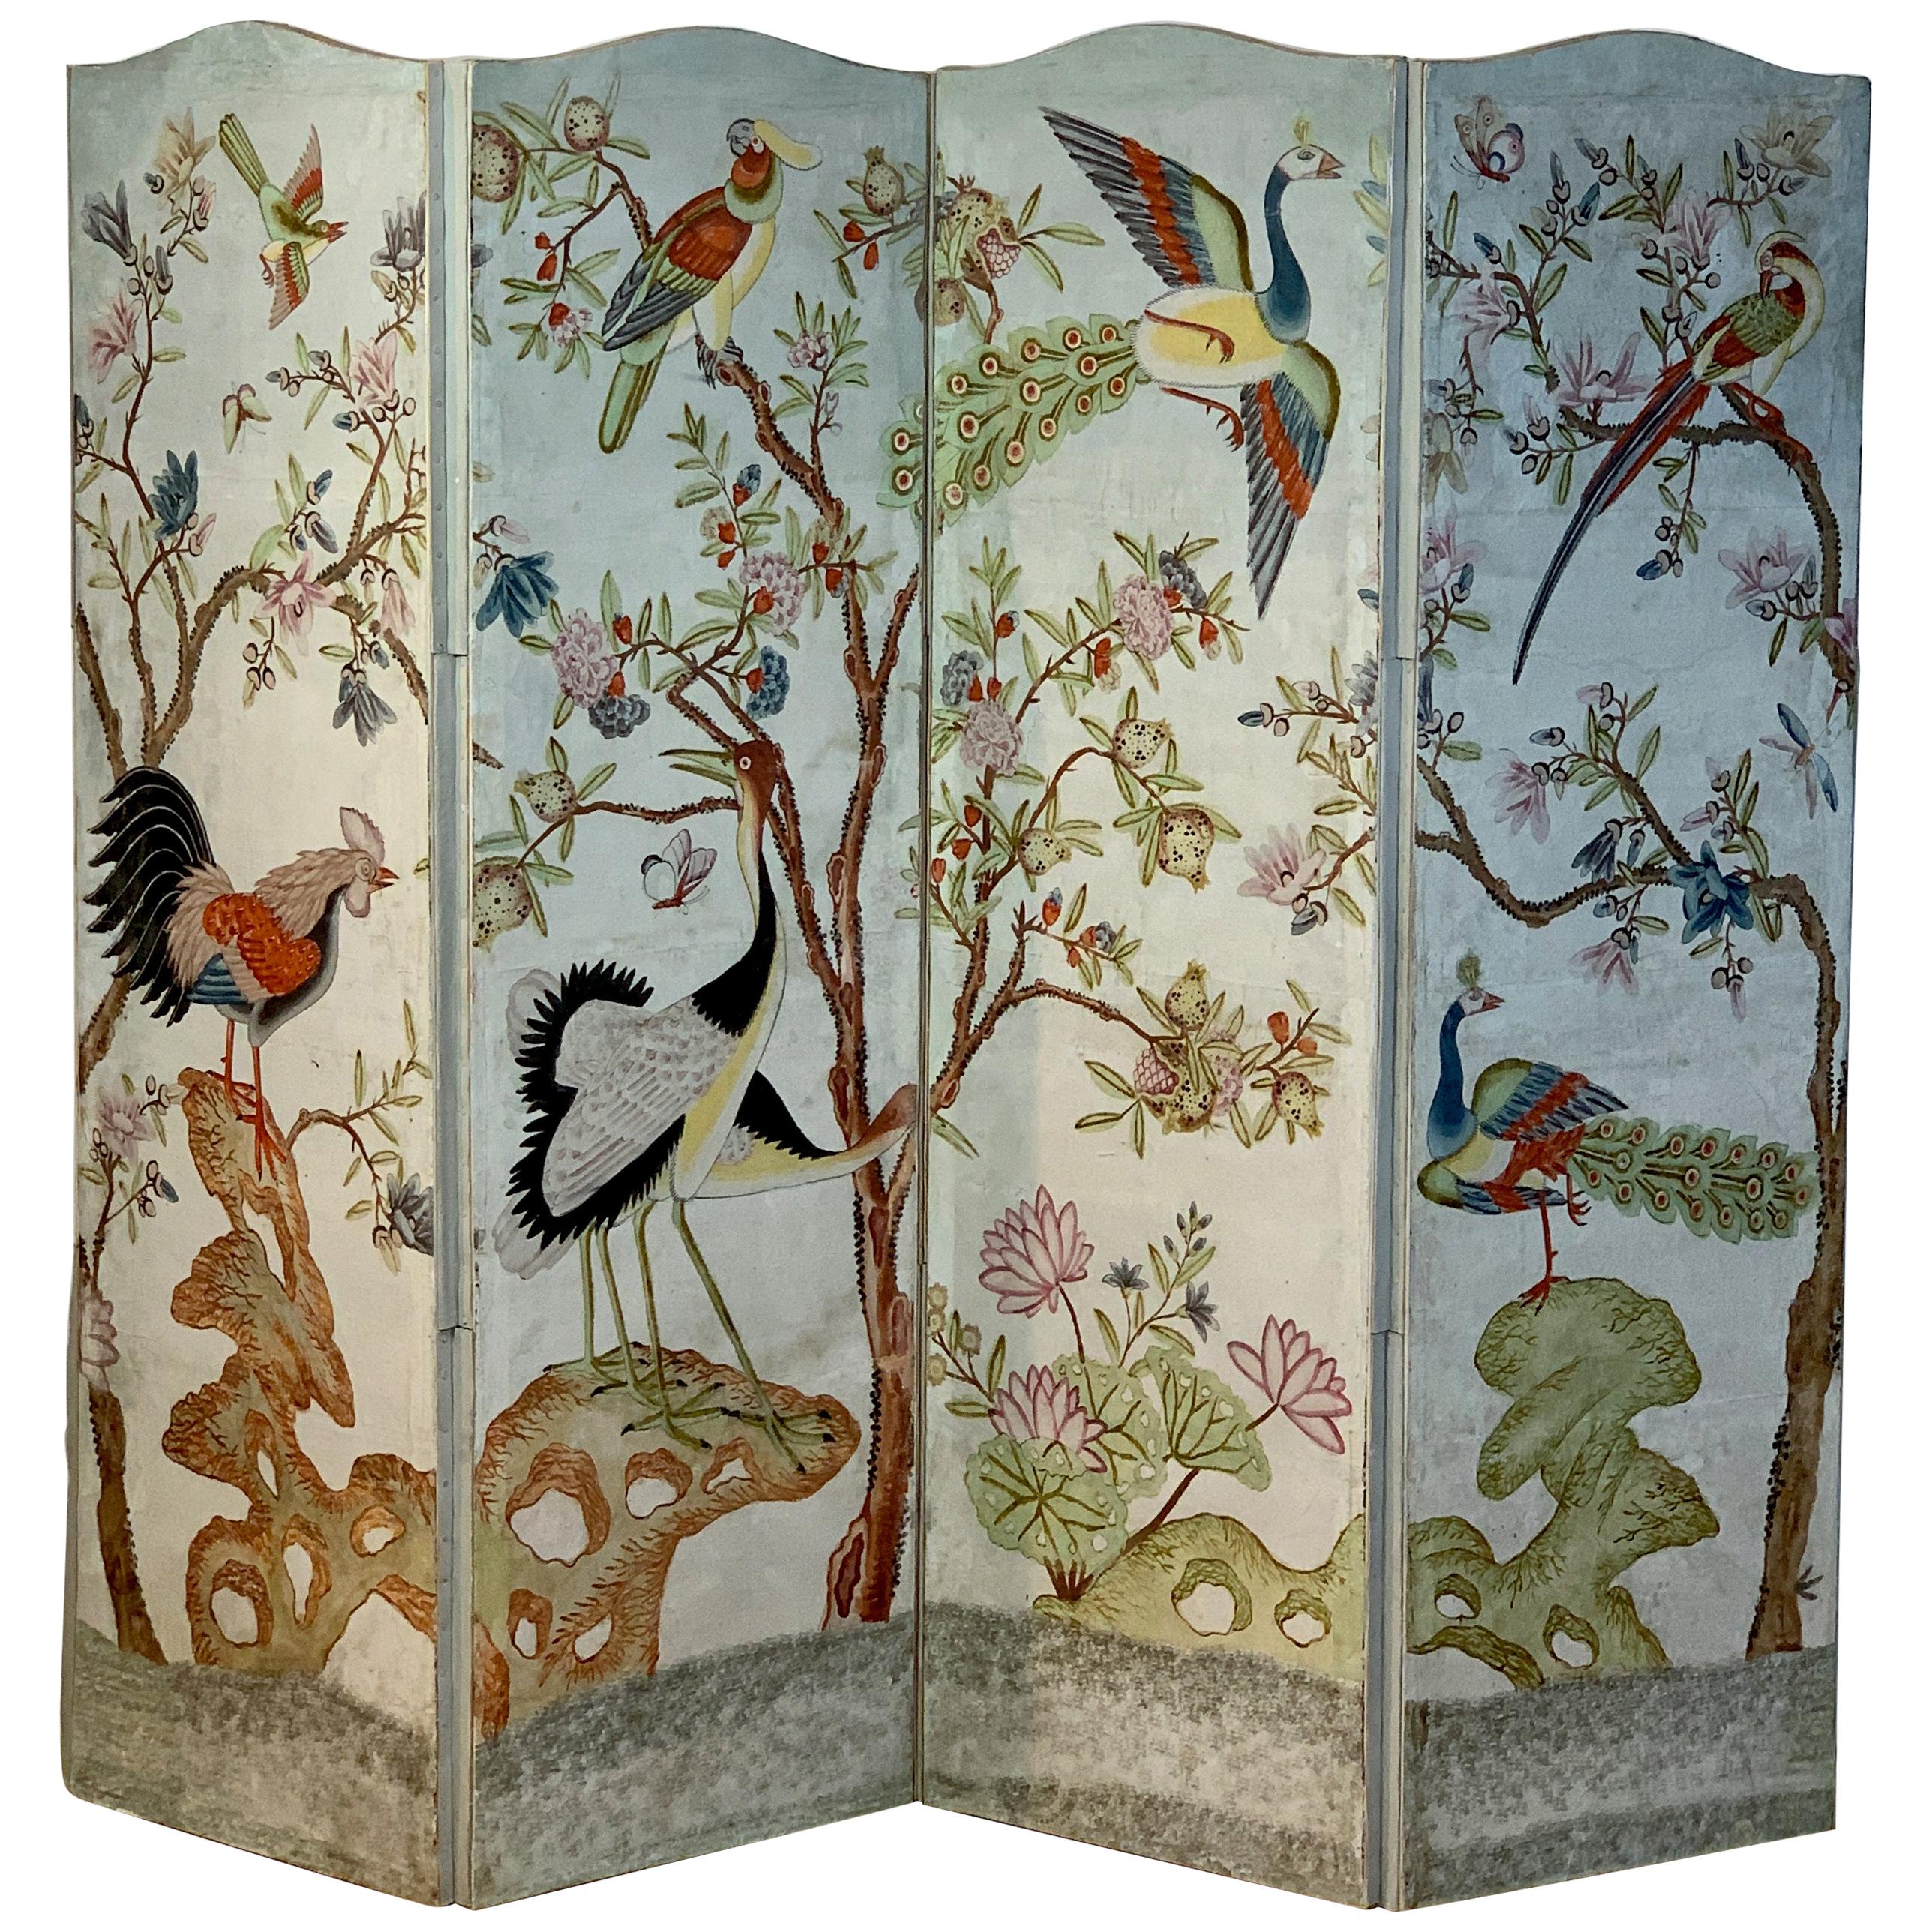 Hand Painted Four Panel Folding Screen in the Style of Gracie or de Gournay